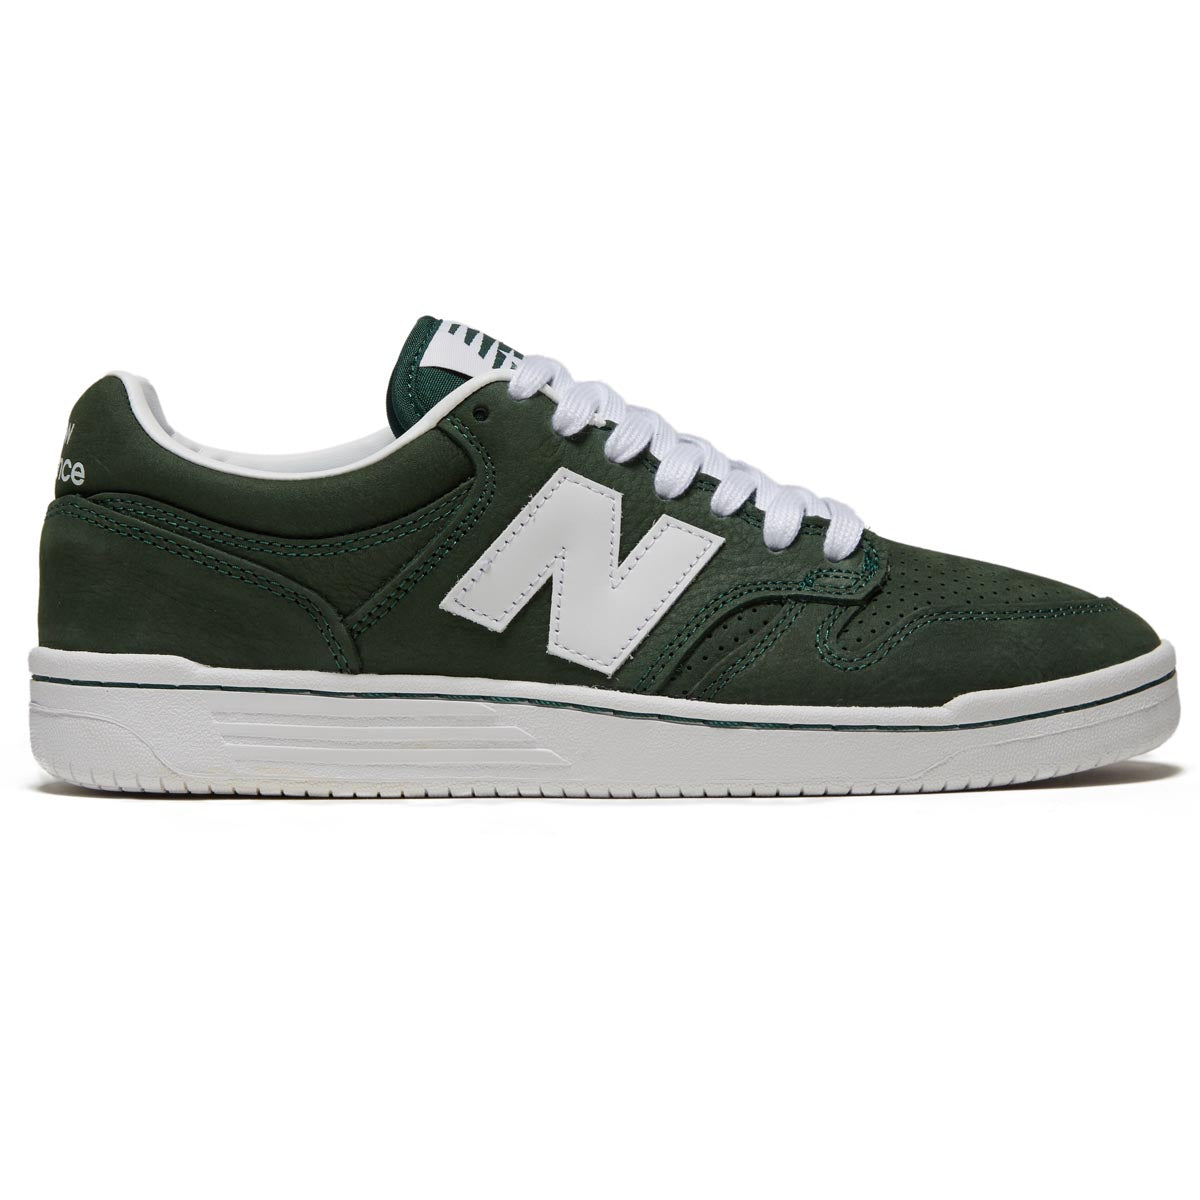 New Balance 480 Shoes - Forest Green/White image 1